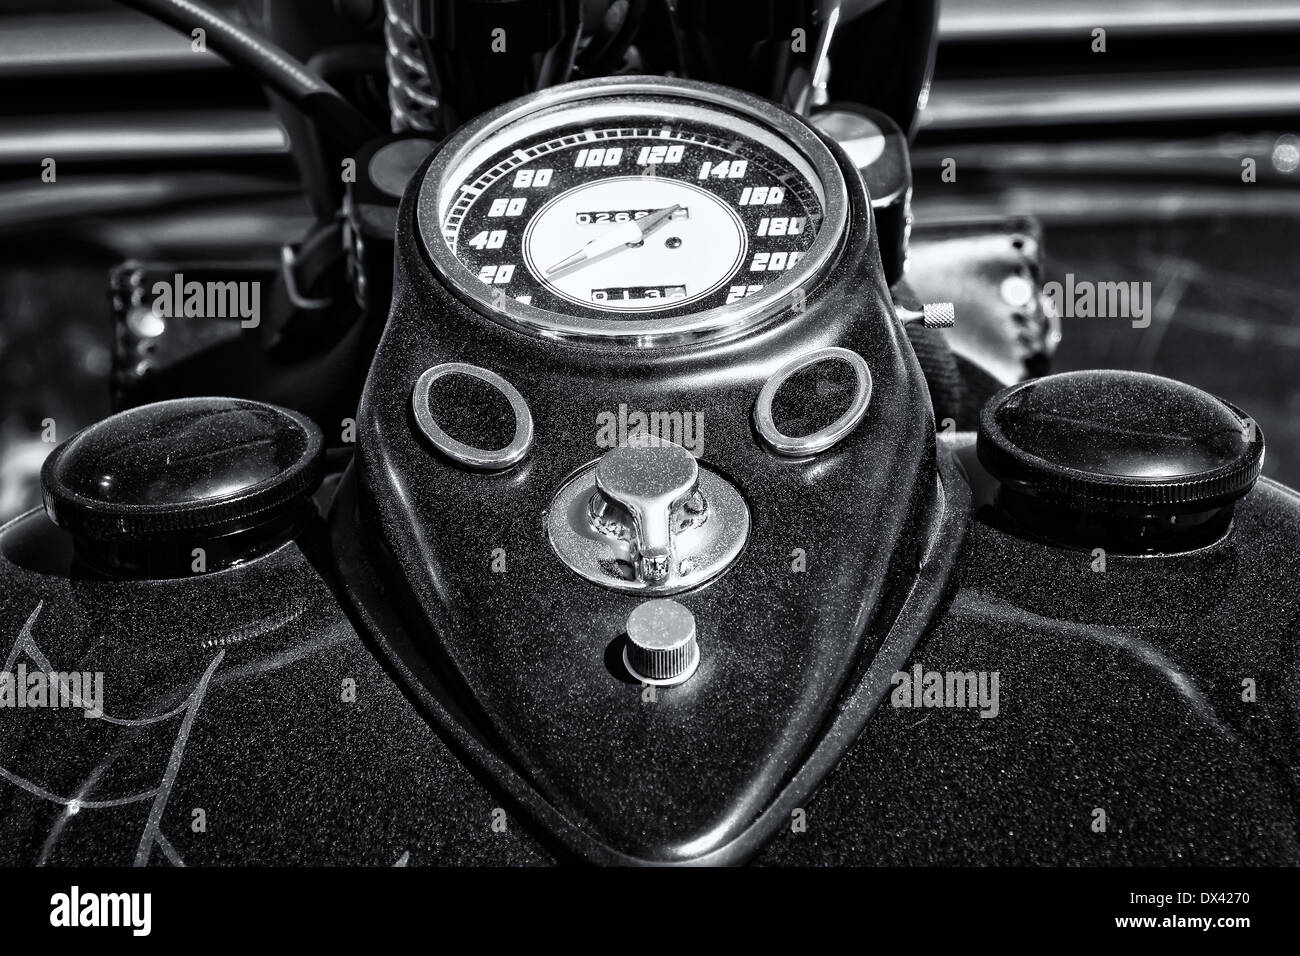 The dashboard and fuel tank motorcycle Harley Davidson Custom Chopper, black and white Stock Photo